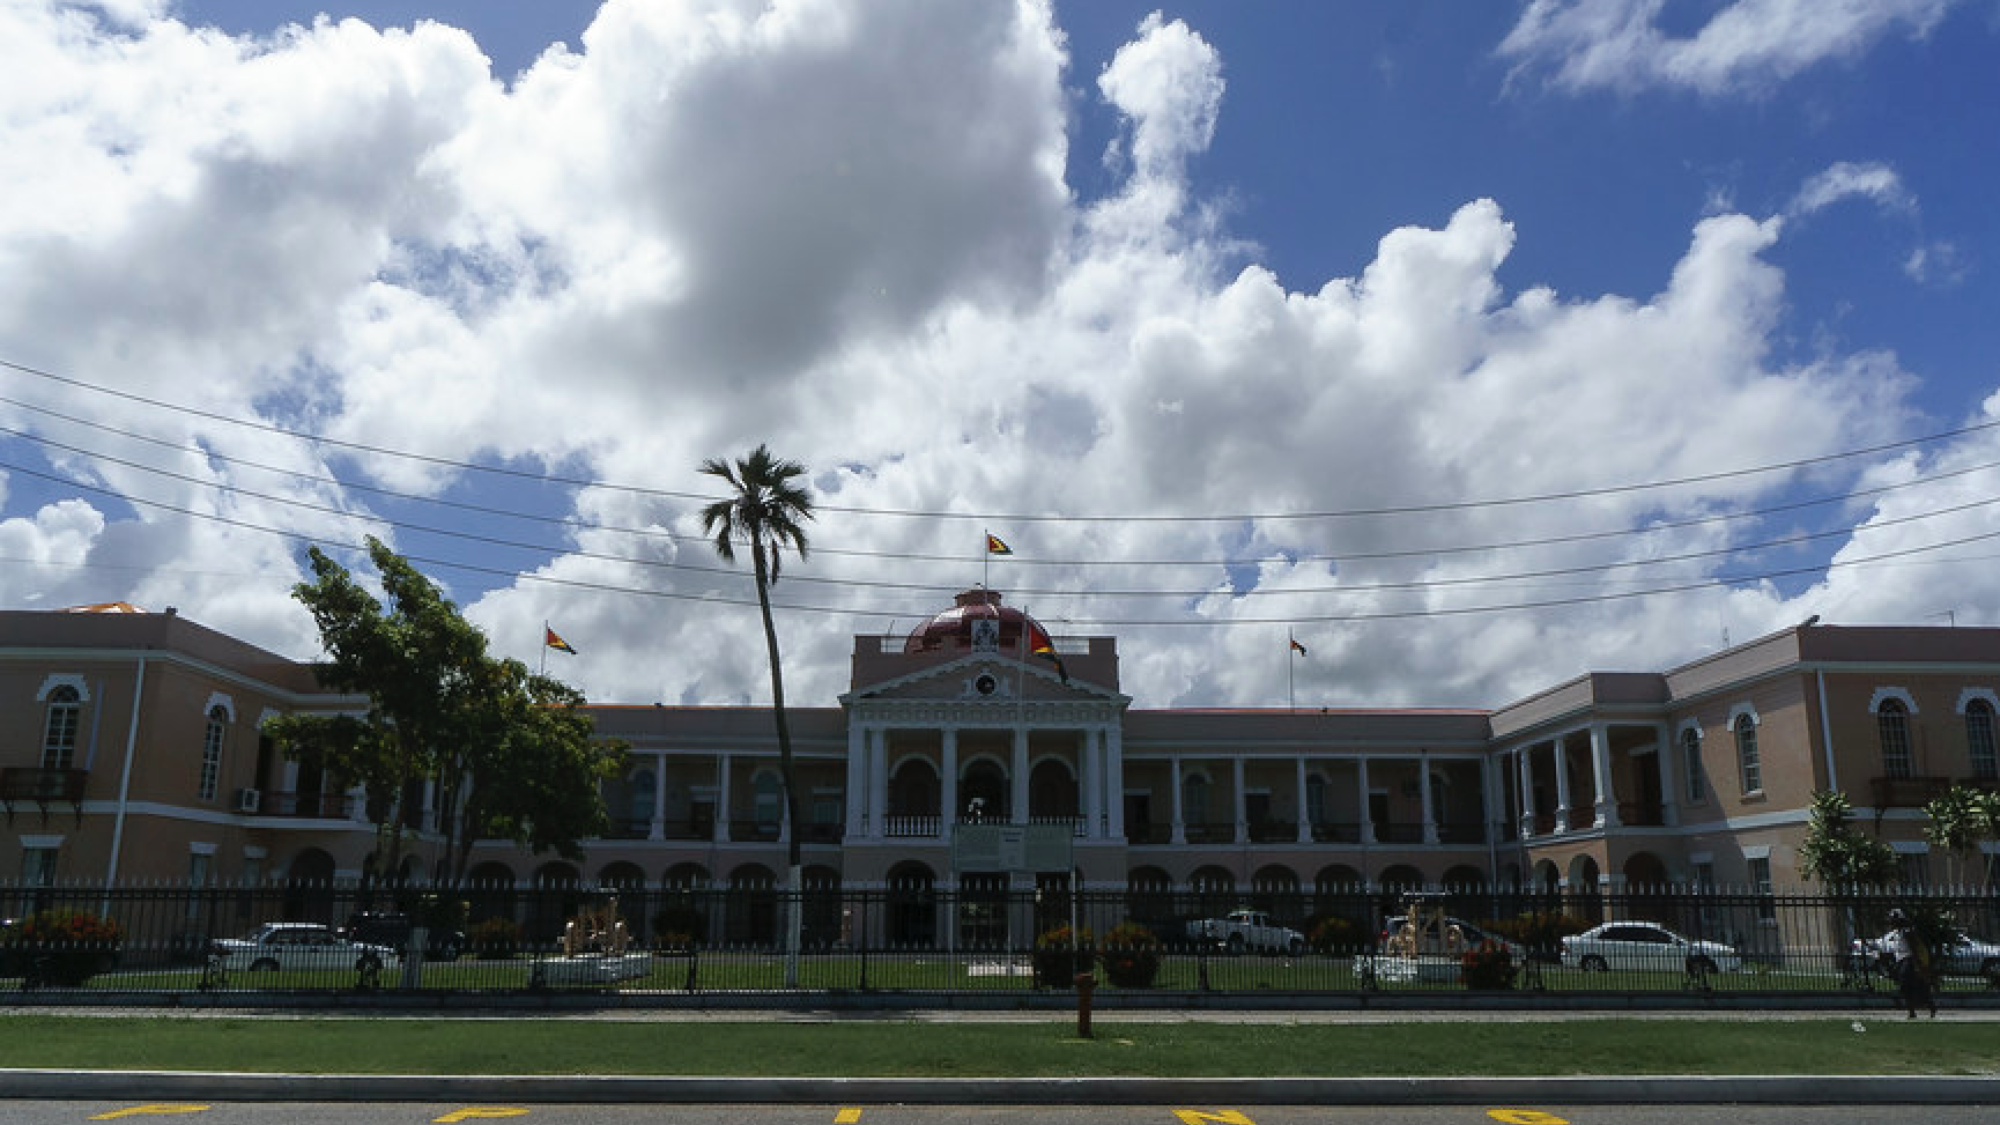 A picture of the front of the national parliament building in Georgetown, Guyana.